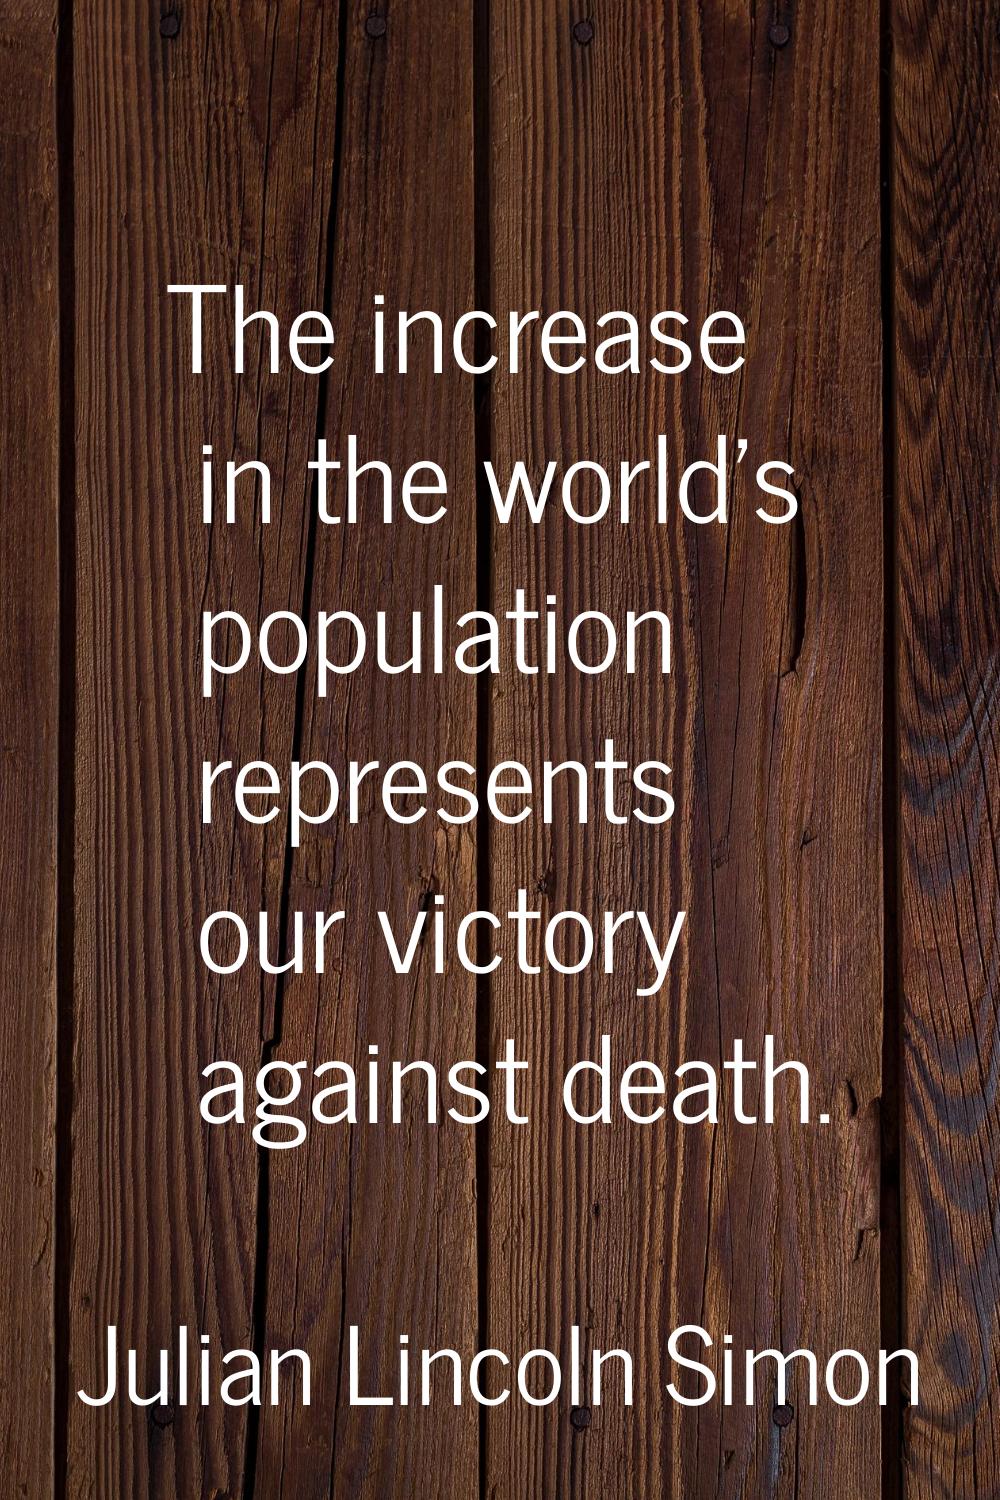 The increase in the world's population represents our victory against death.